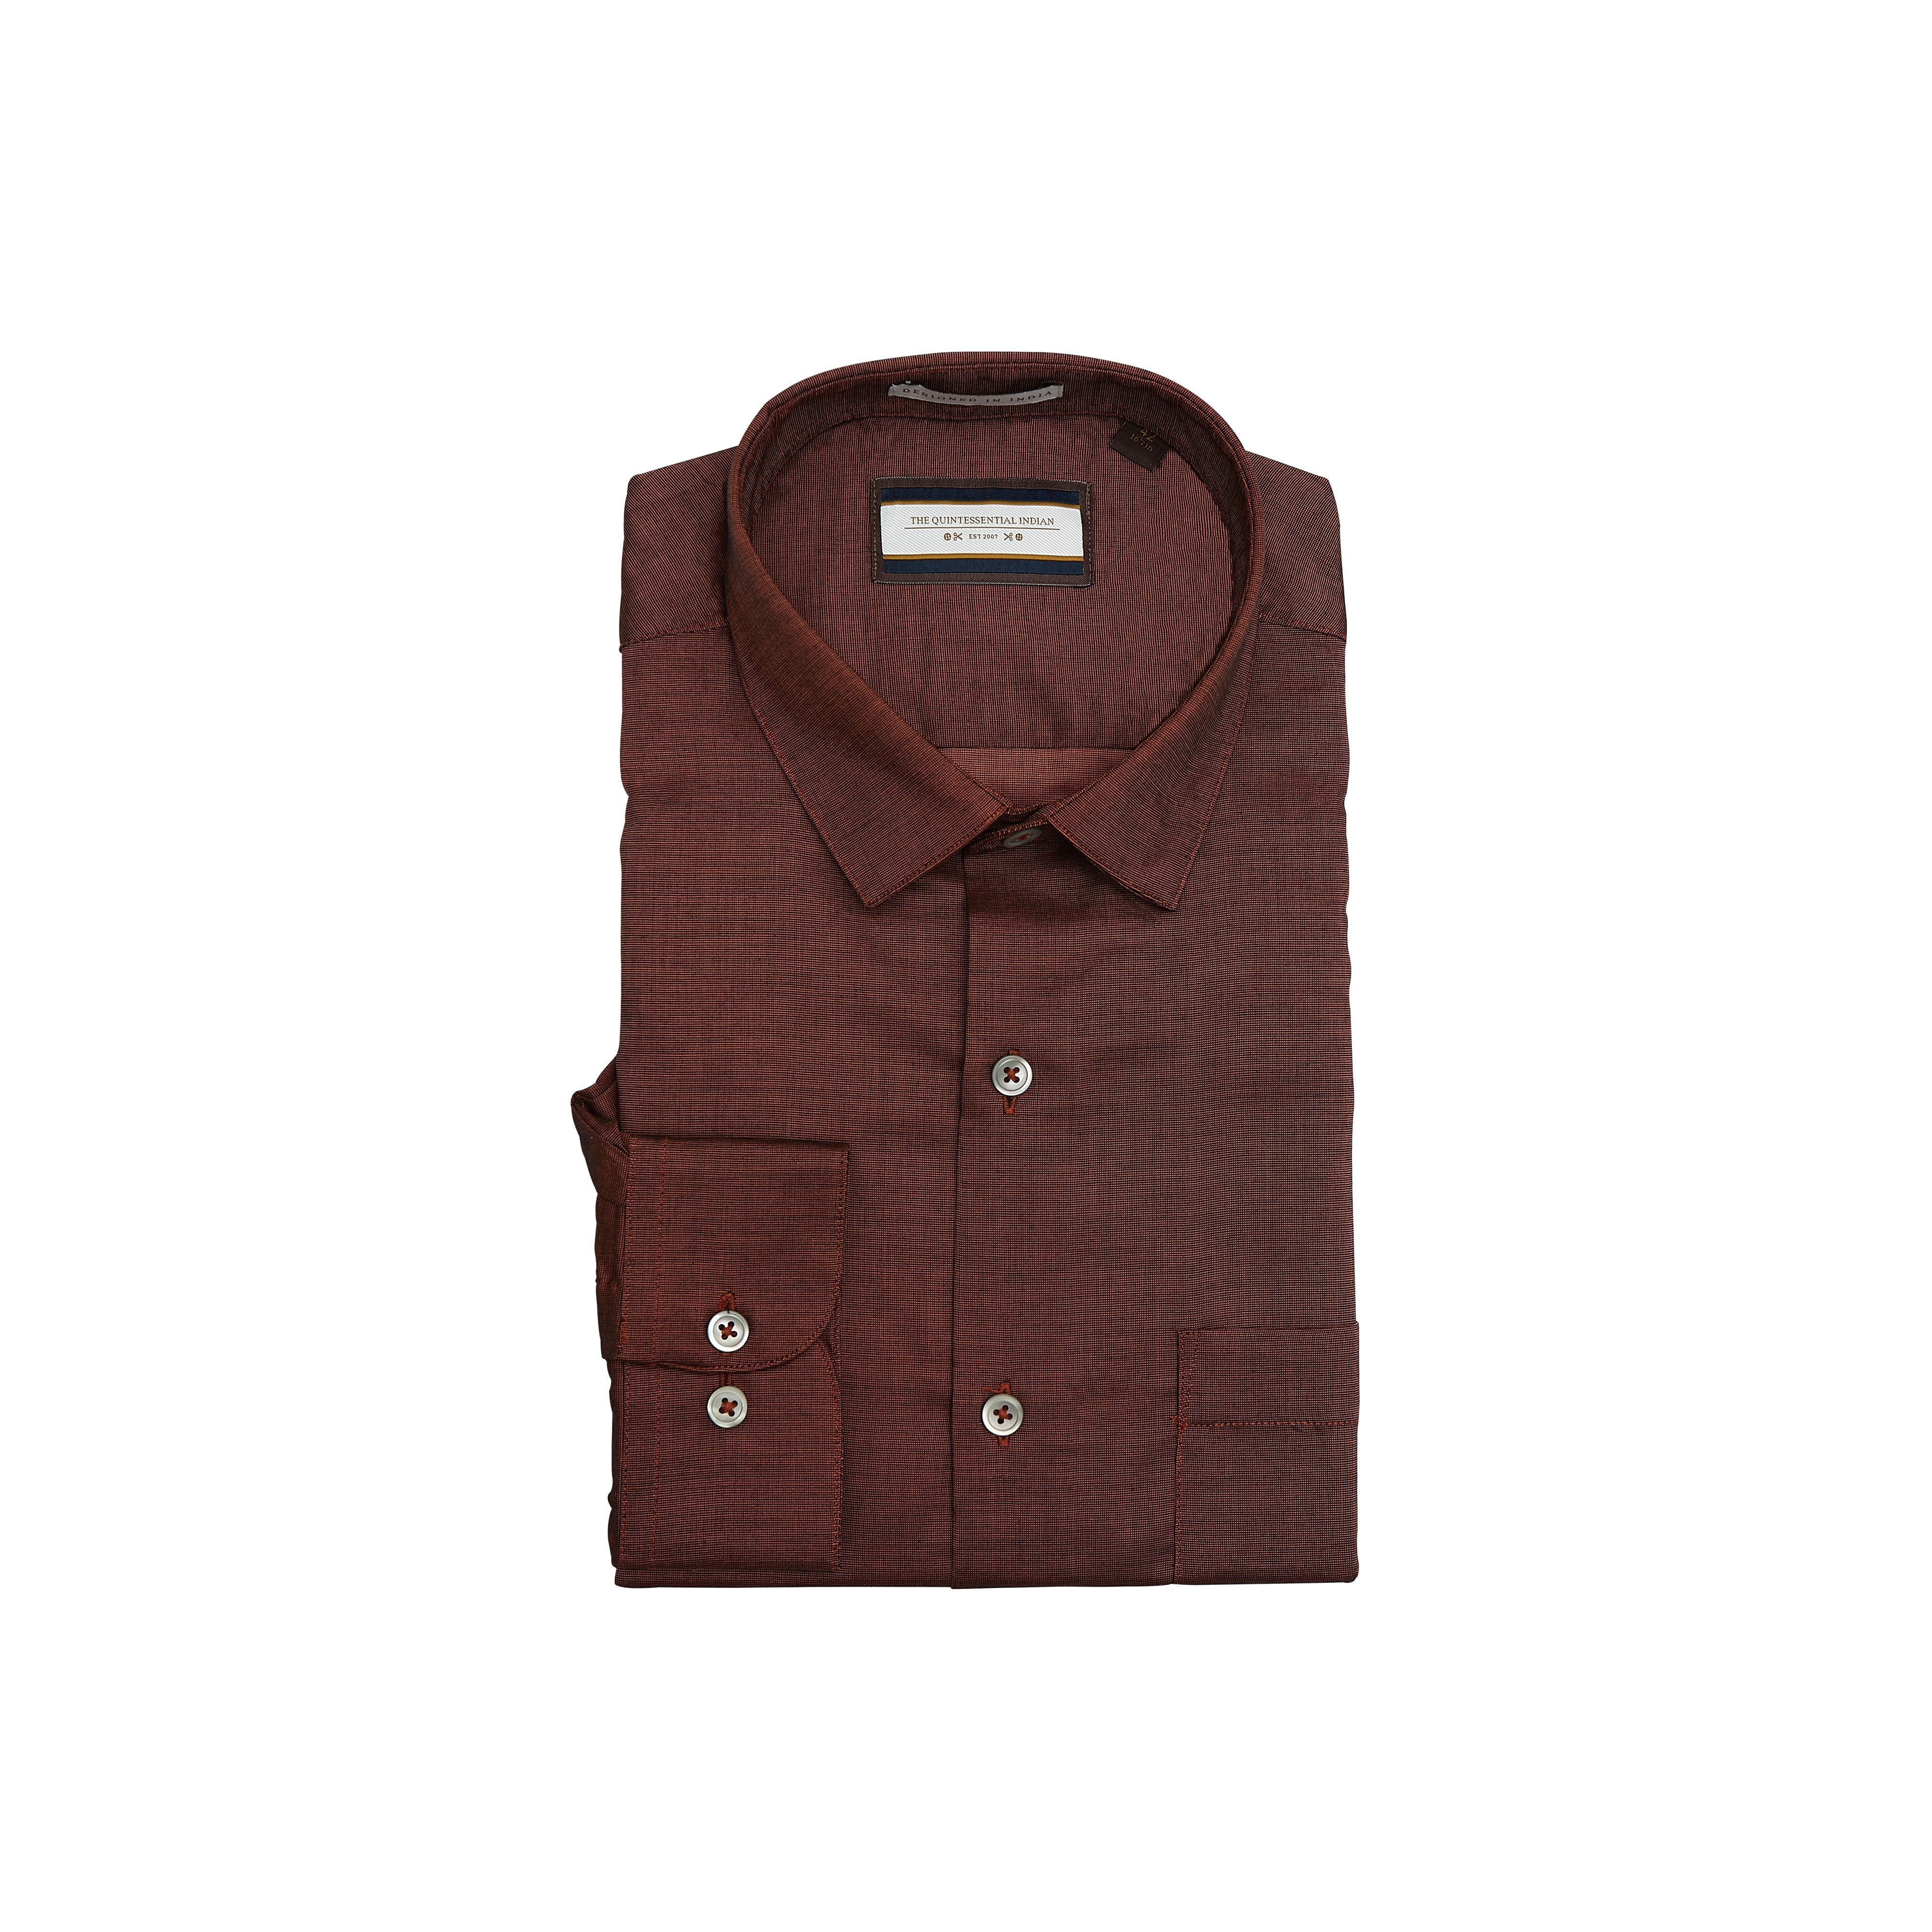 Rust color Pick and Pick Shirt